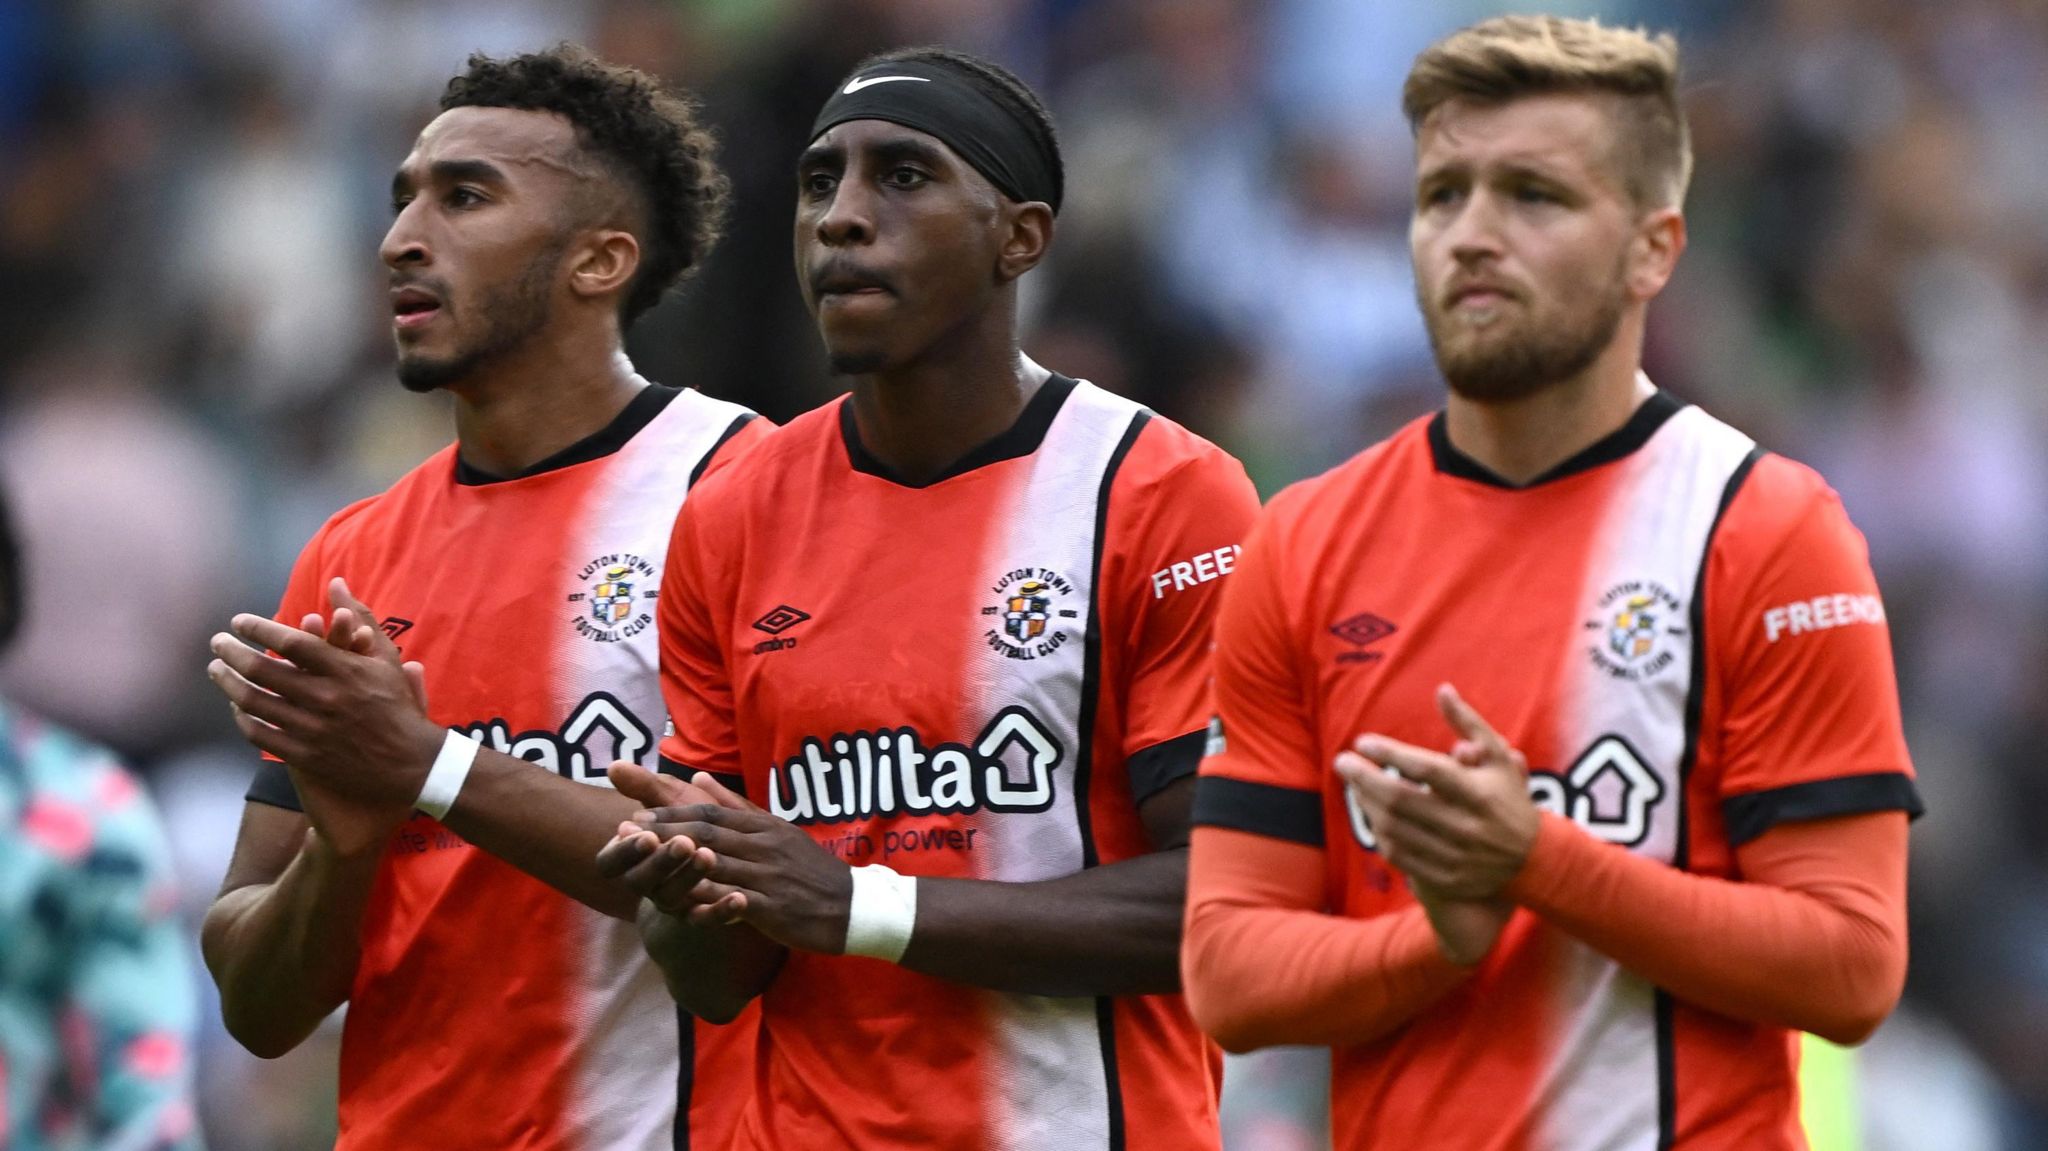 Luton Town: 'It's almost impossible to be too critical' - BBC Sport